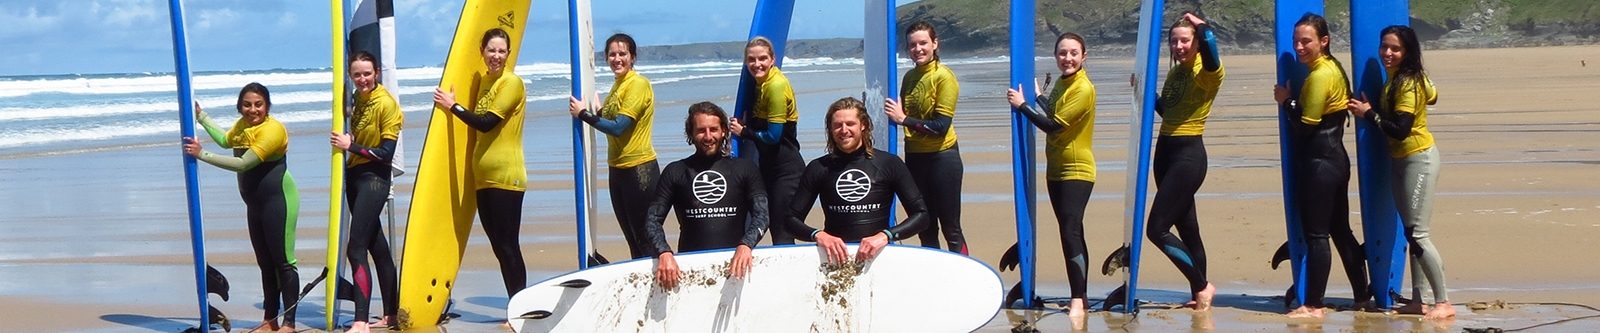 surf group